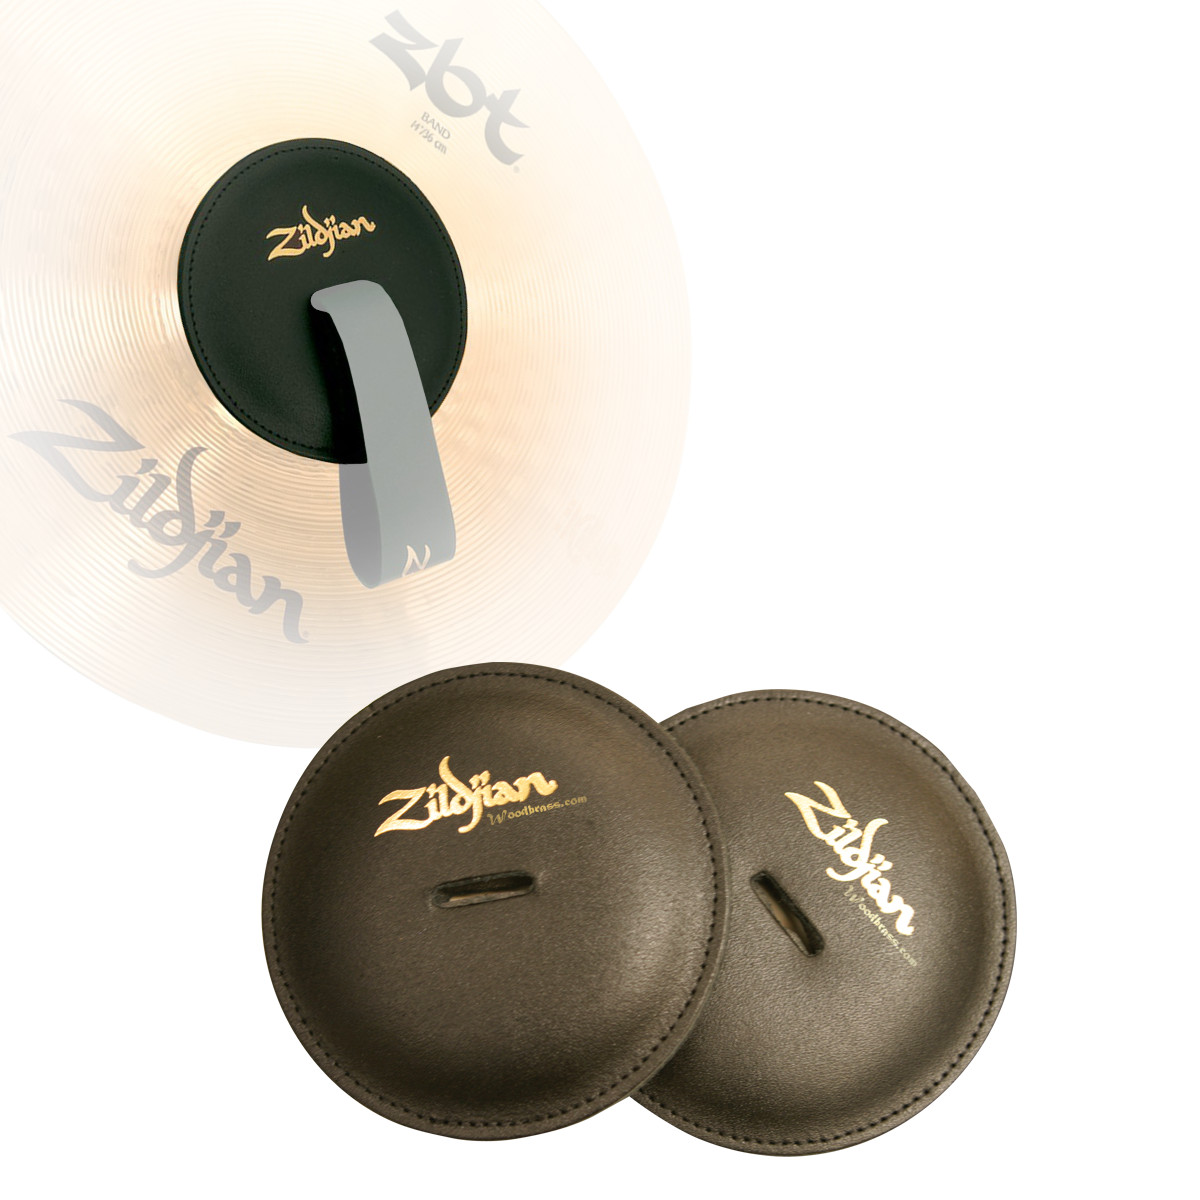 ZILDJIAN ACCESSORIES LEATHER PADS PAIR FOR HAND CYMBALS STRAPS